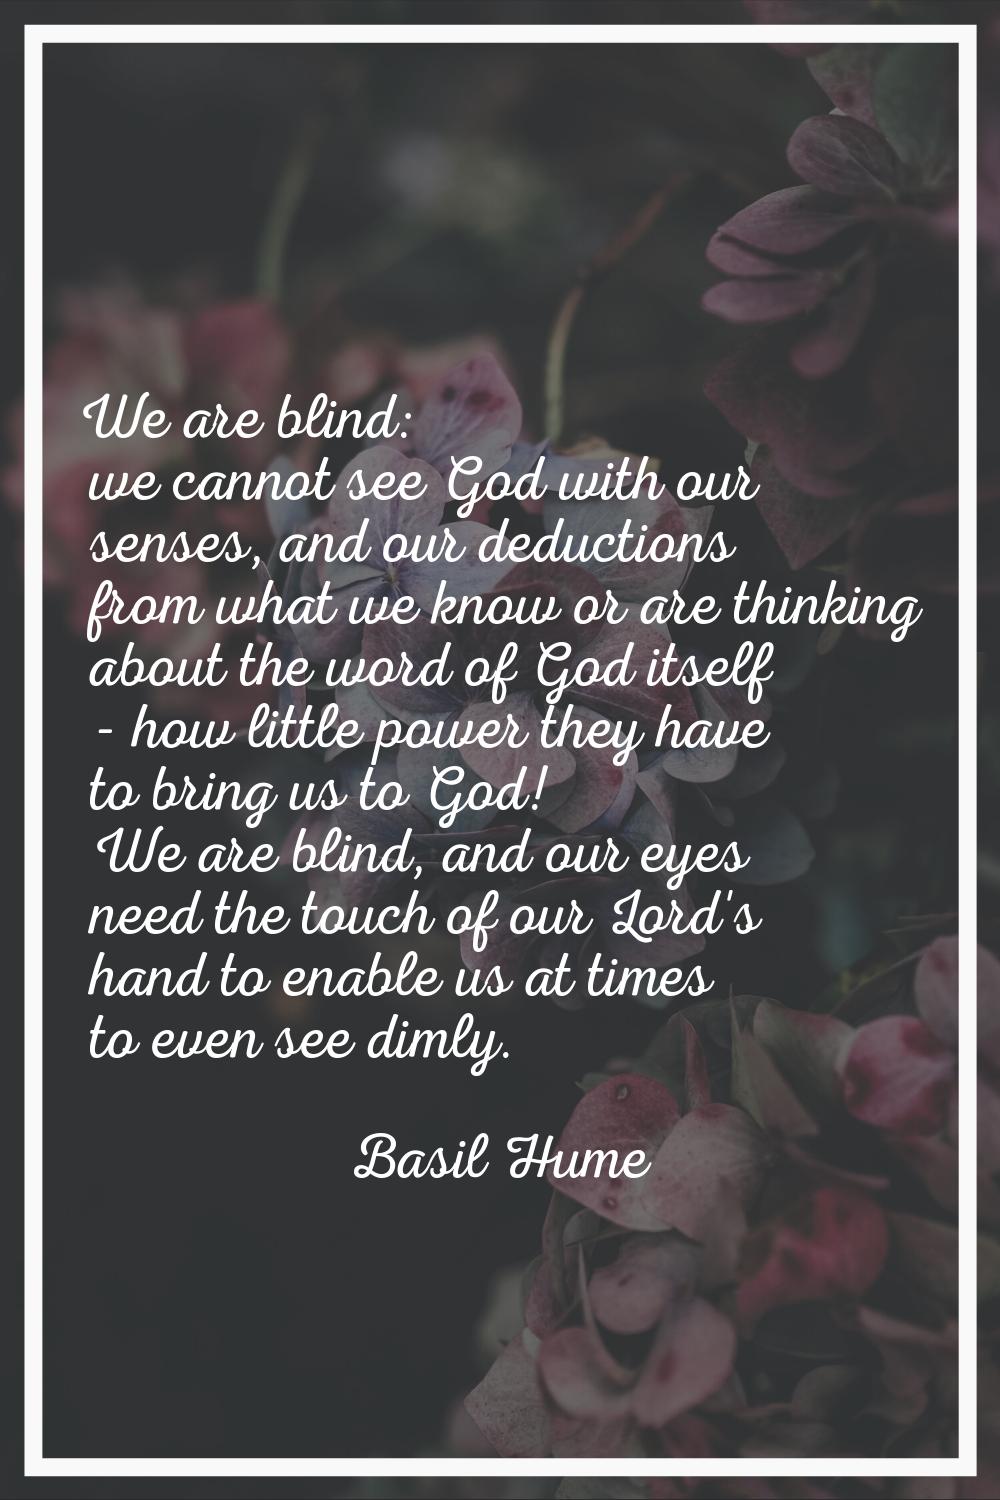 We are blind: we cannot see God with our senses, and our deductions from what we know or are thinki